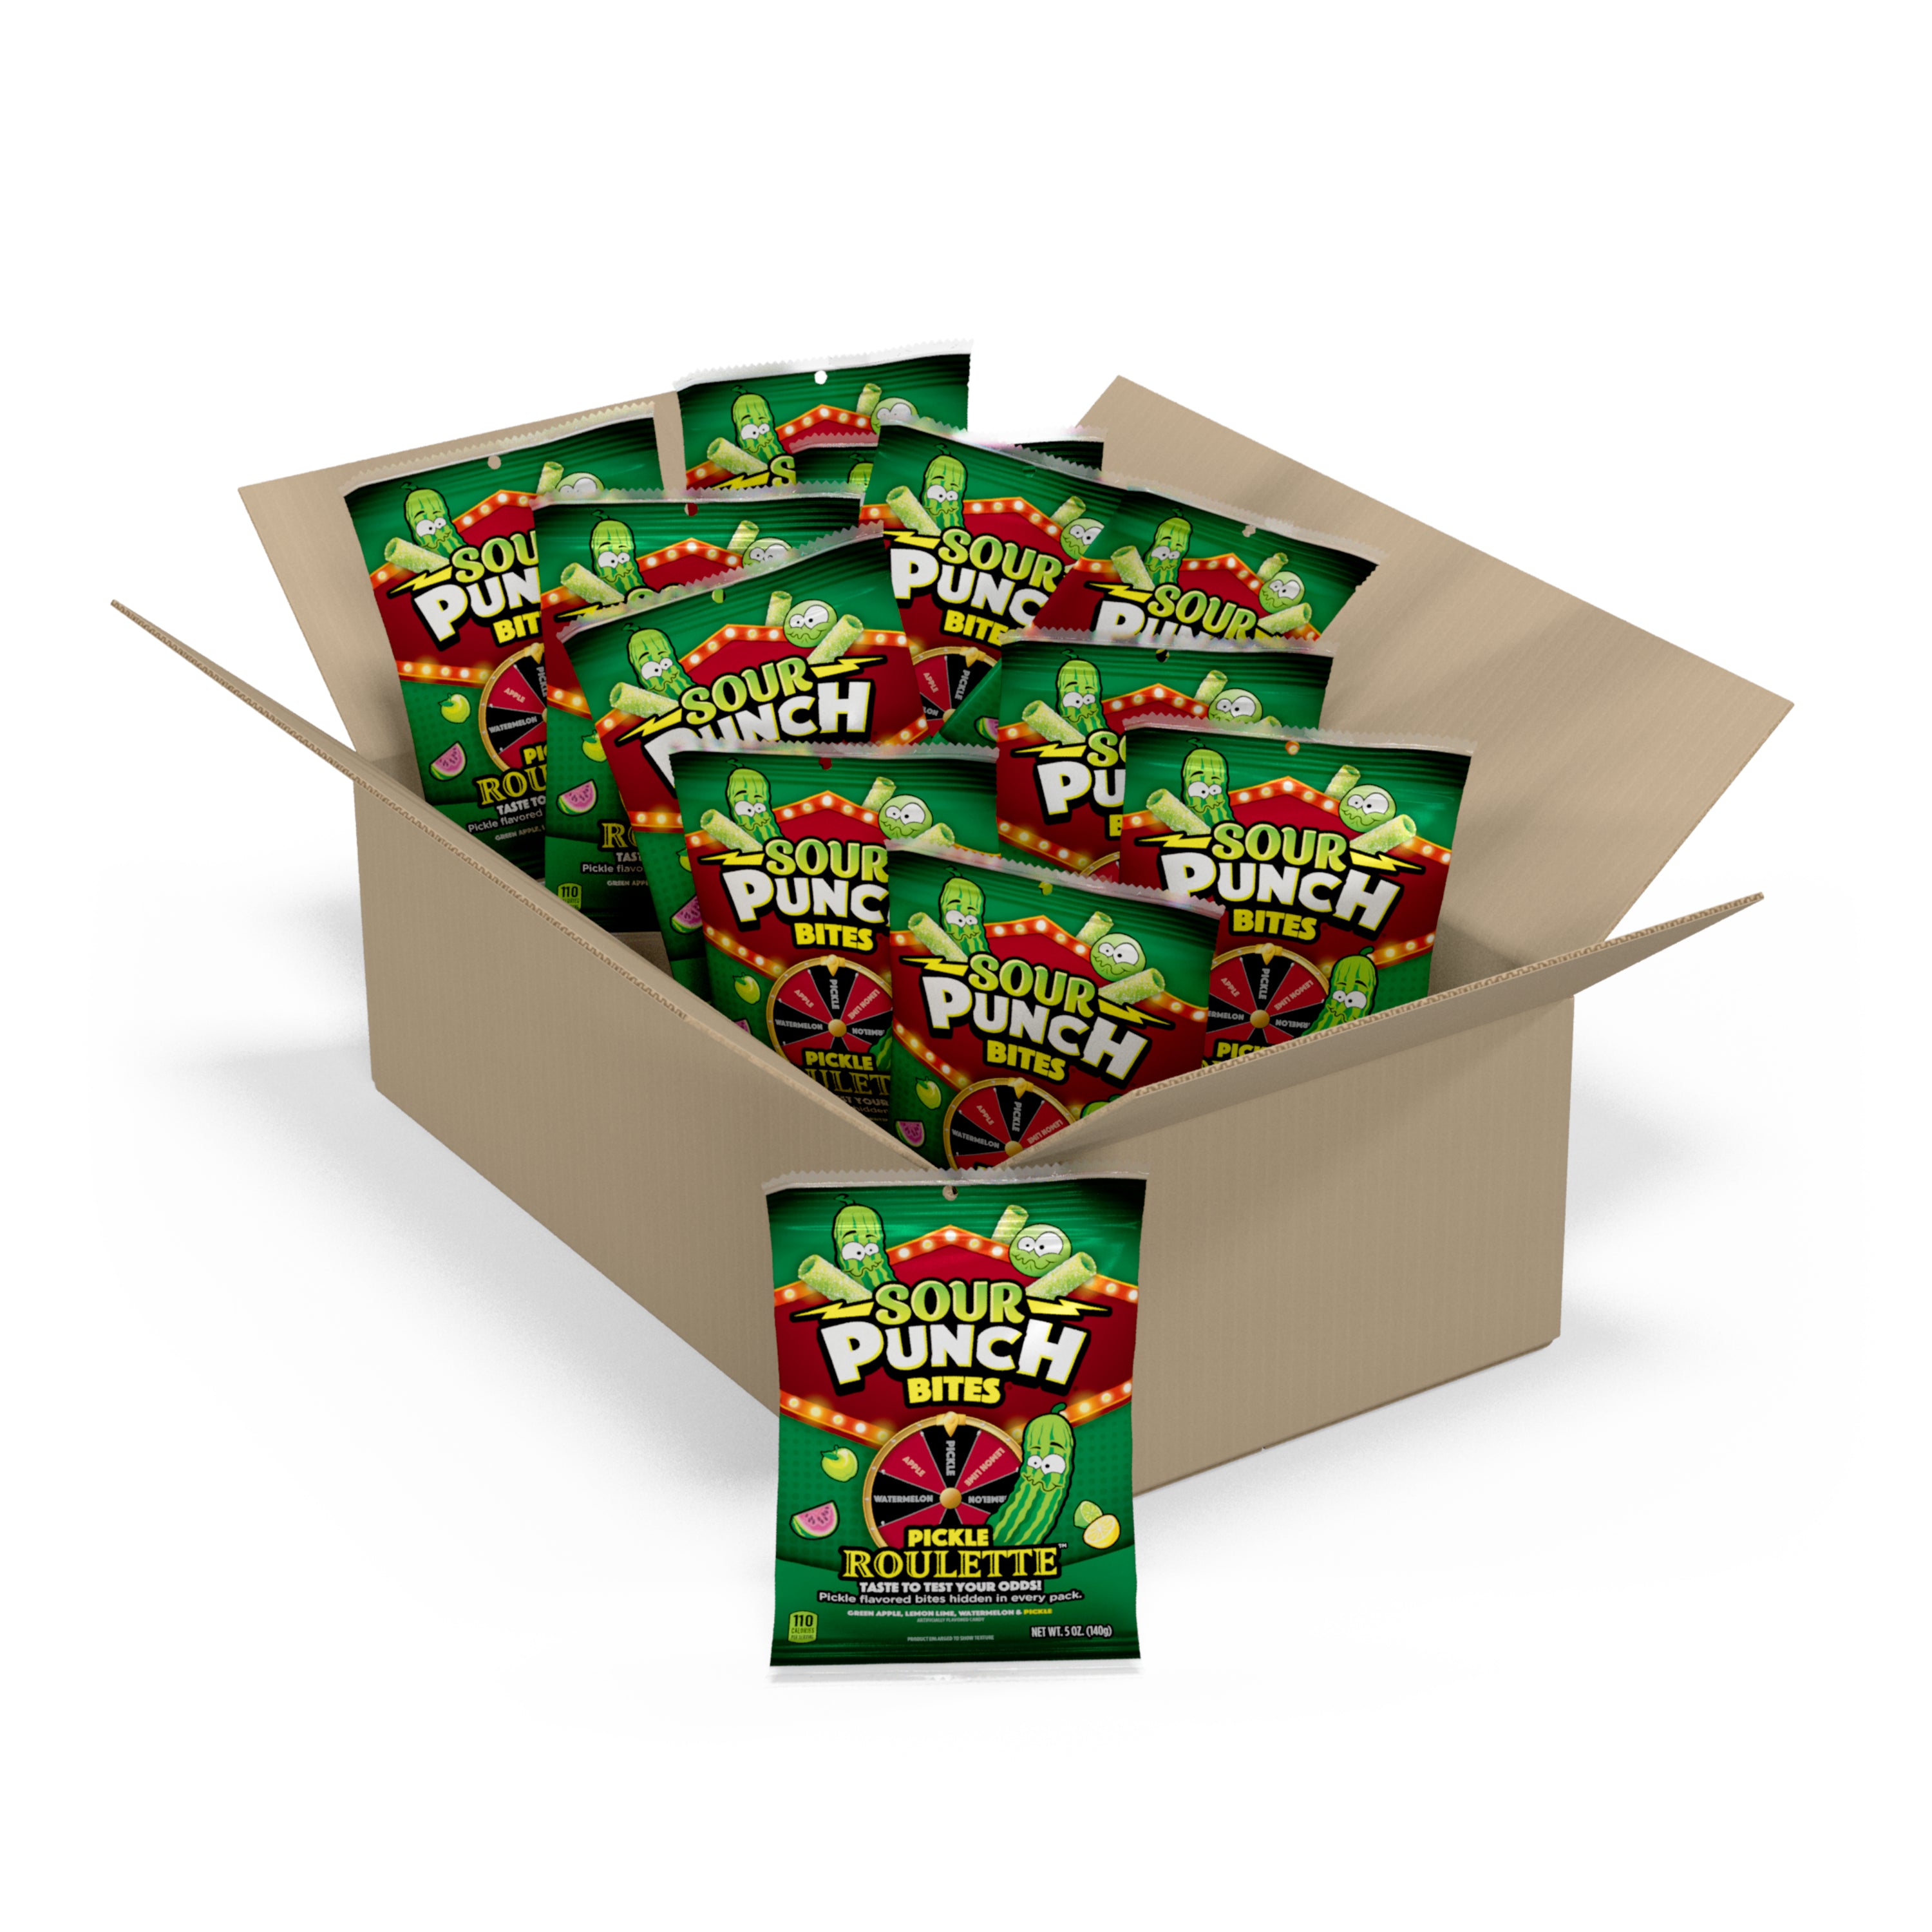 SOUR PUNCH Pickle Roulette Bites - Pickle Candy Bites - 12 Pack